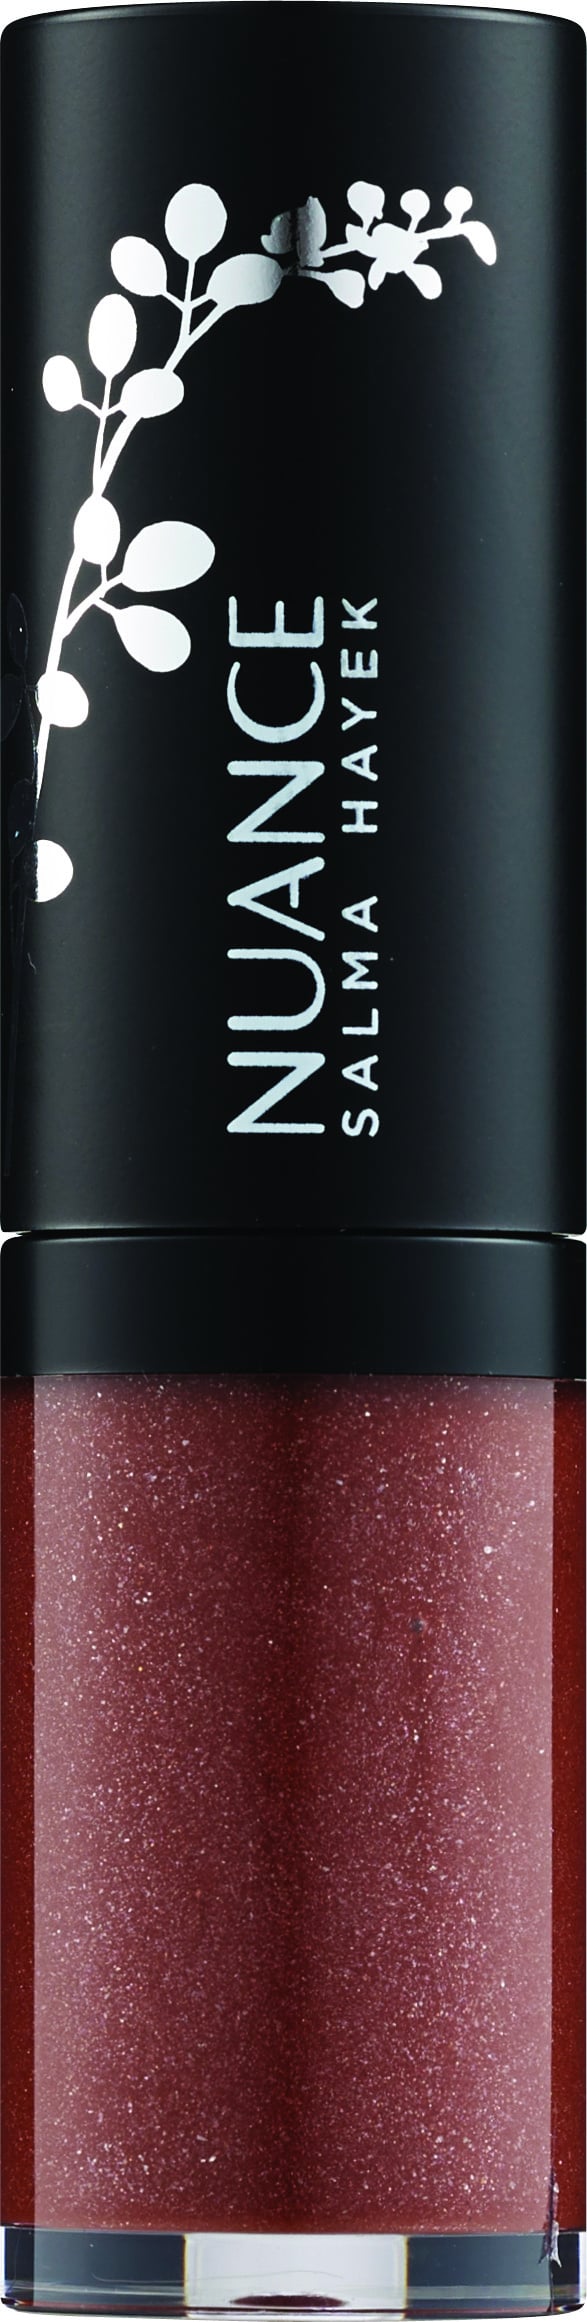 Nuance Salma Hayek True Color Plumping Liquid Lipstick in Melted Maple